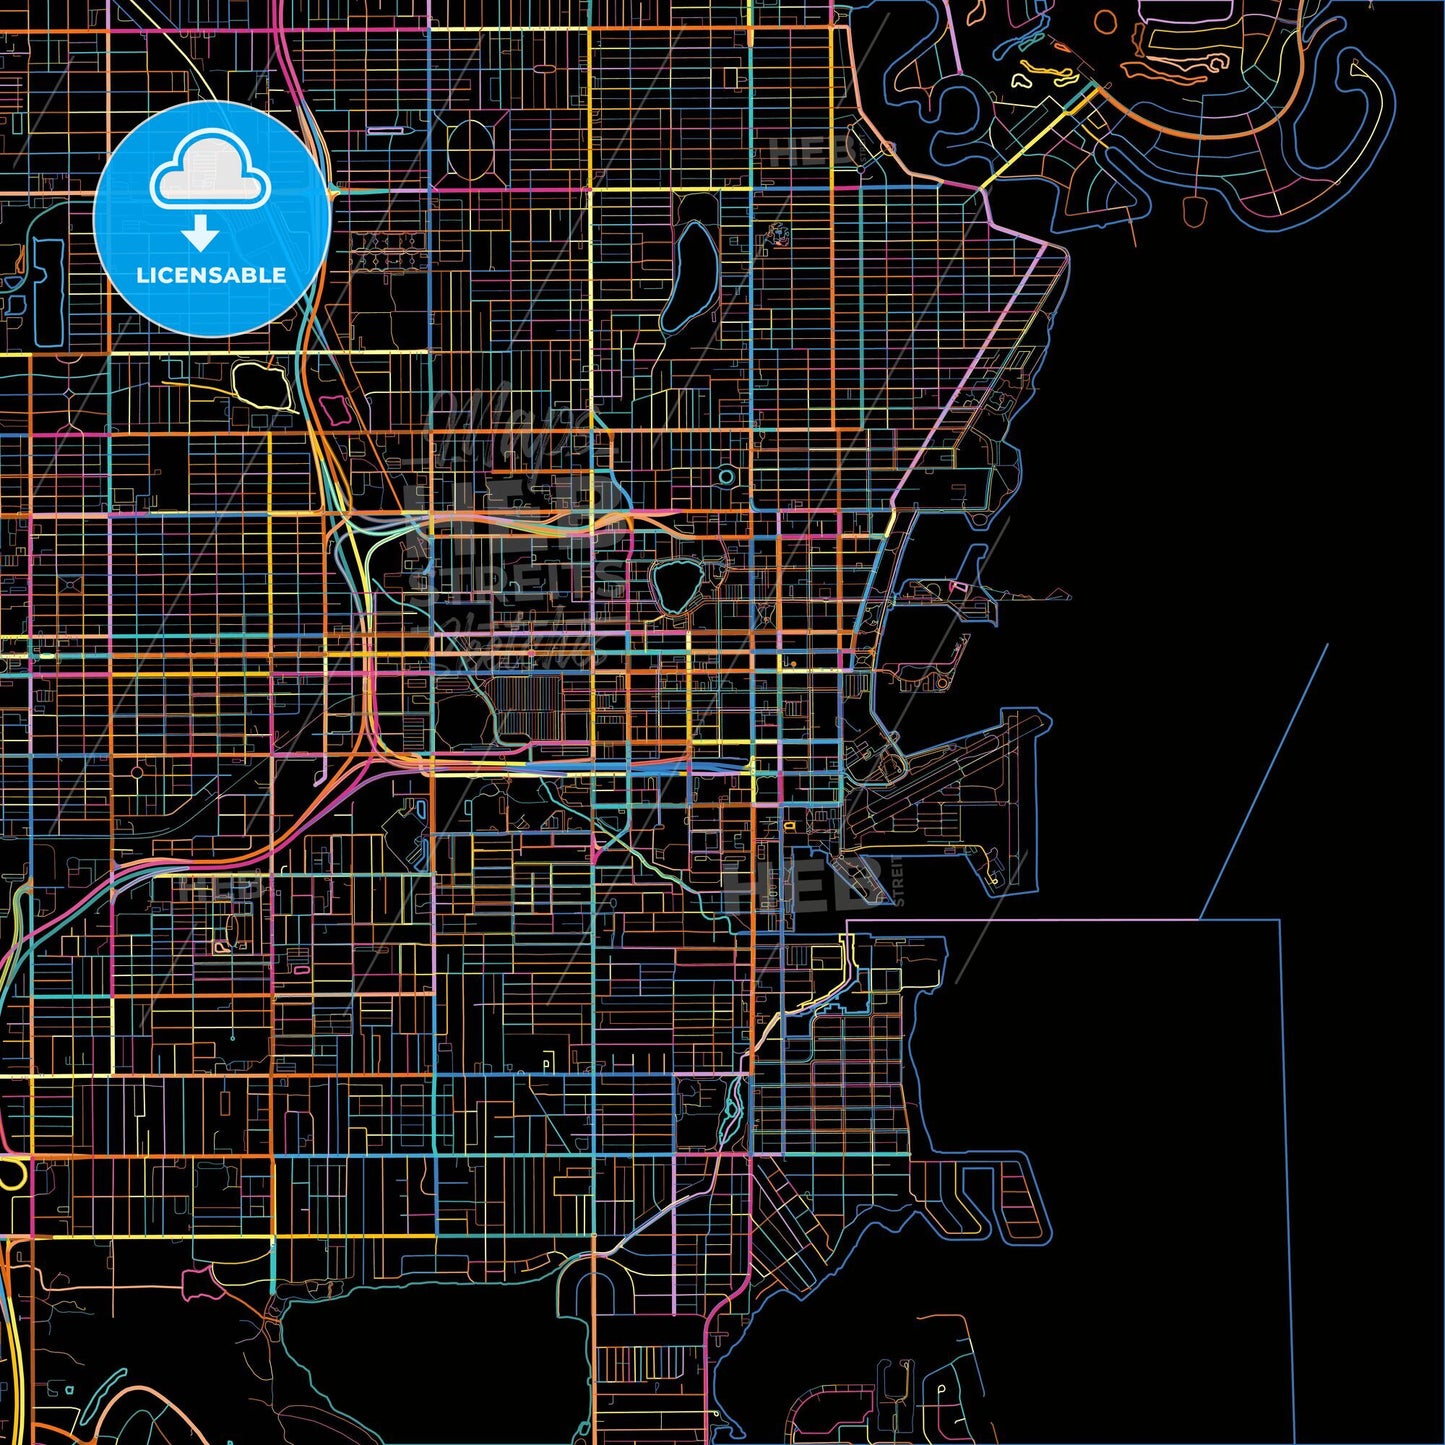 St. Petersburg, Florida, United States, colorful city map on black background